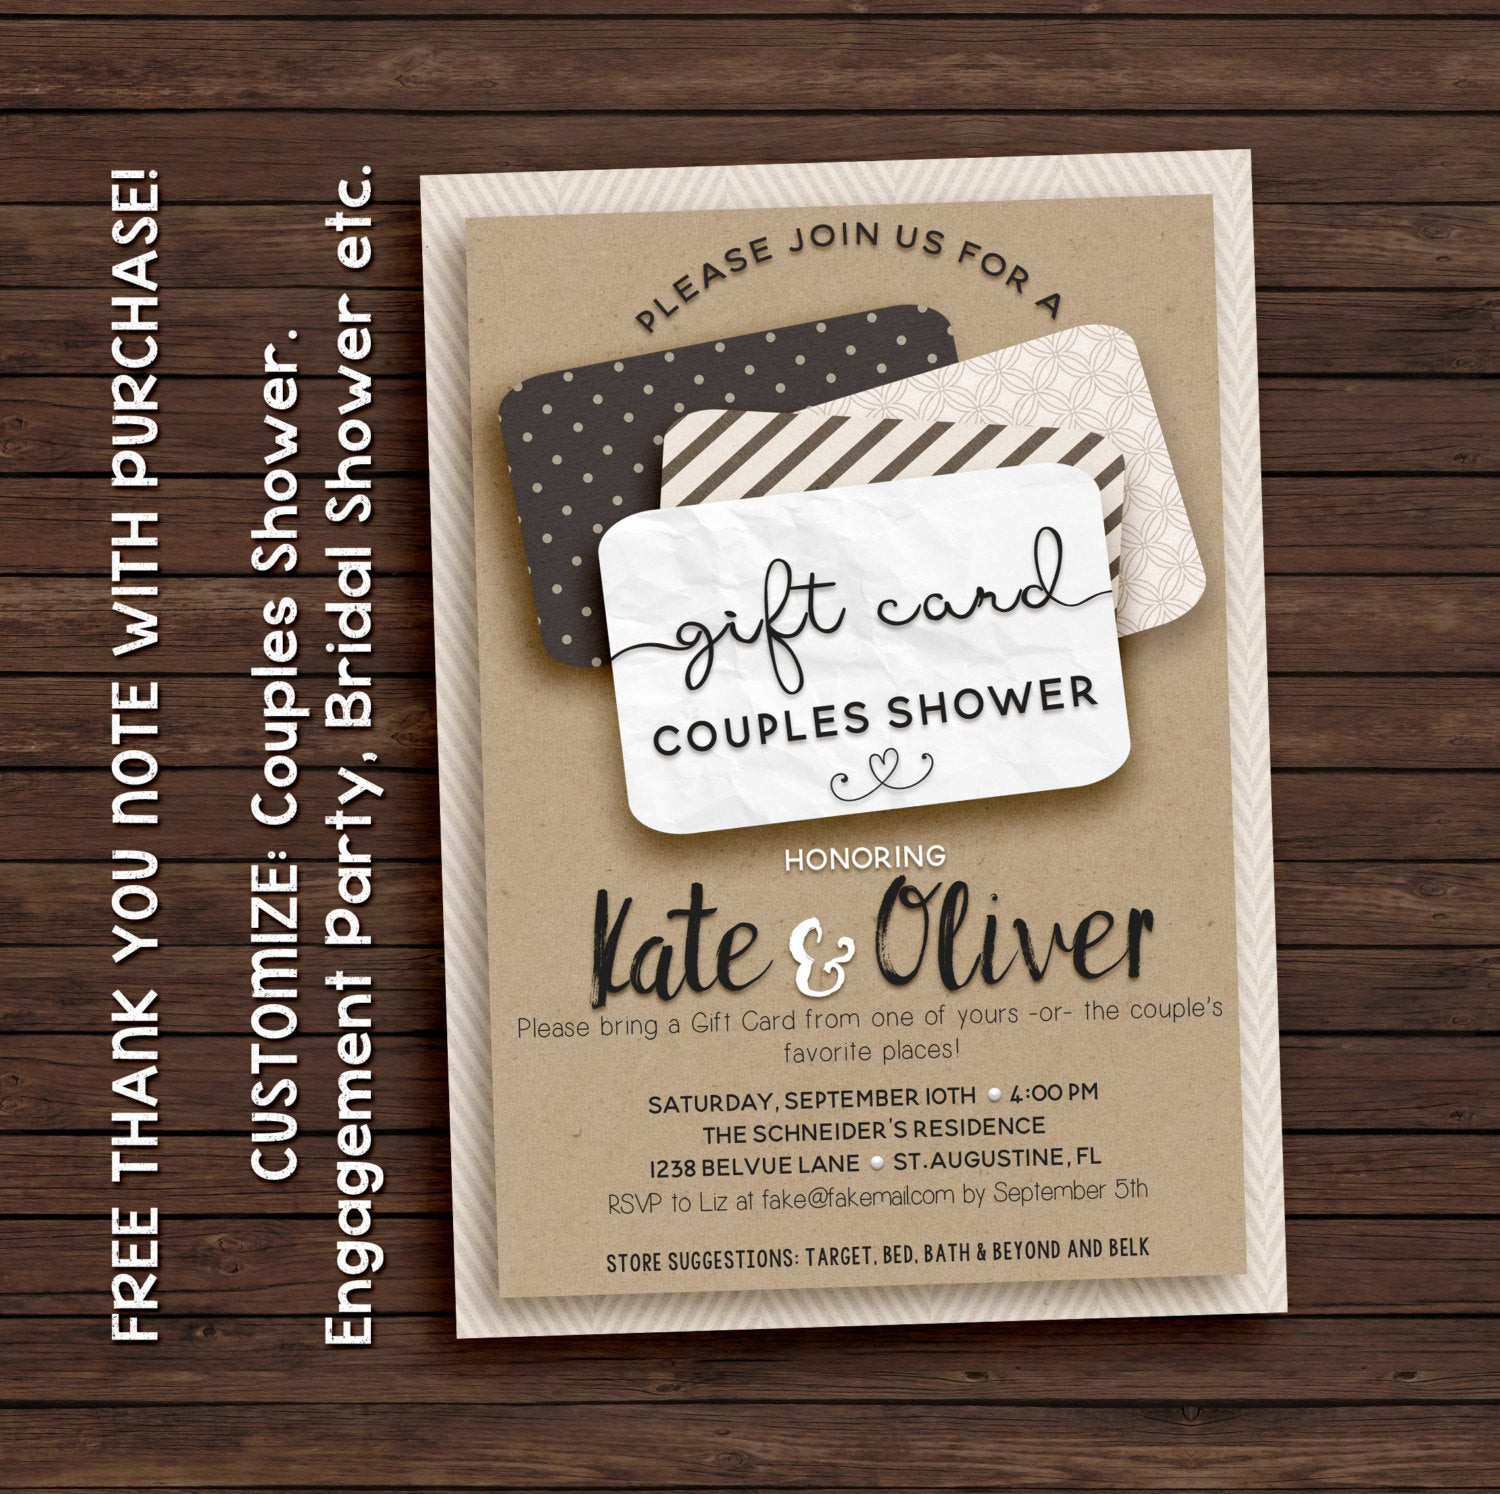 Gift Certificate Ideas For Couples
 Couples shower invitation t card invitation printable